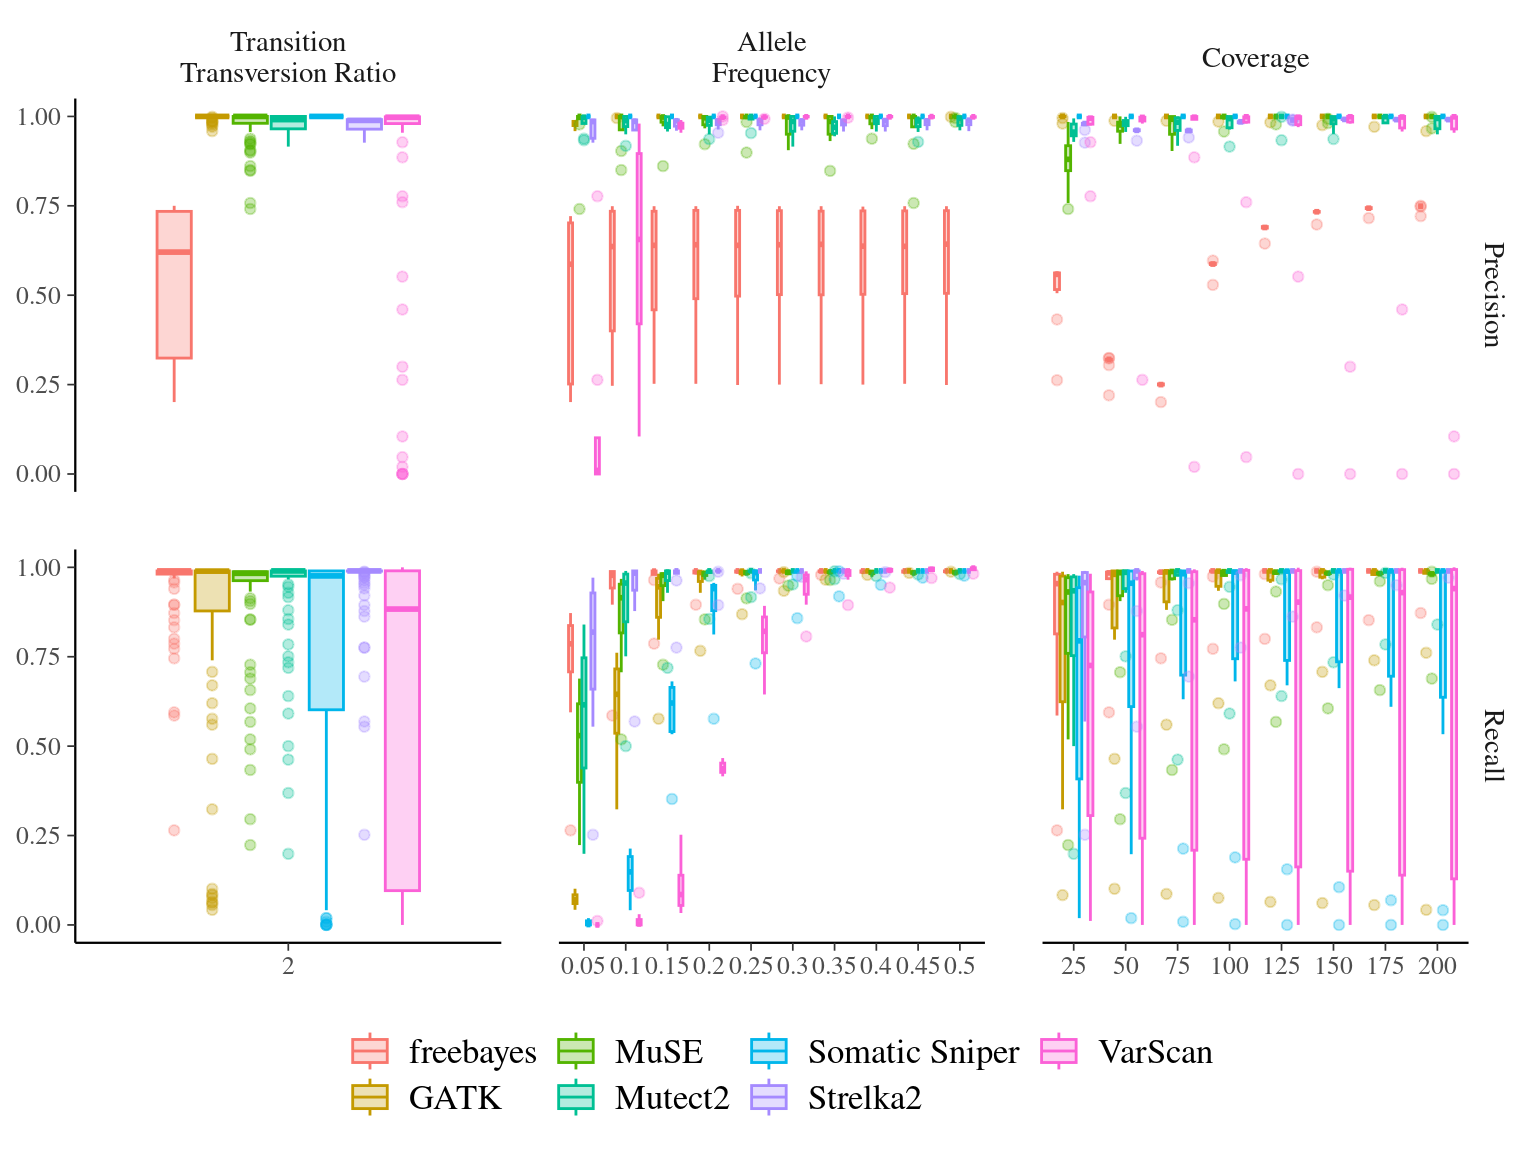 Variation in the performance of mutation detection tools with varying biological and sequencing parameters. The recall and the precision rates have been assessed for each tool to detect mutations with varying transition/transversion ratio, allelic fraction, and coverage. Tools to detect mutations include freebayes (red), MuSE (light green), Somatic Sniper (light blue), VarScan (pink), GATK (orange), Mutect2 (dark green), and Strelka2 (purple).